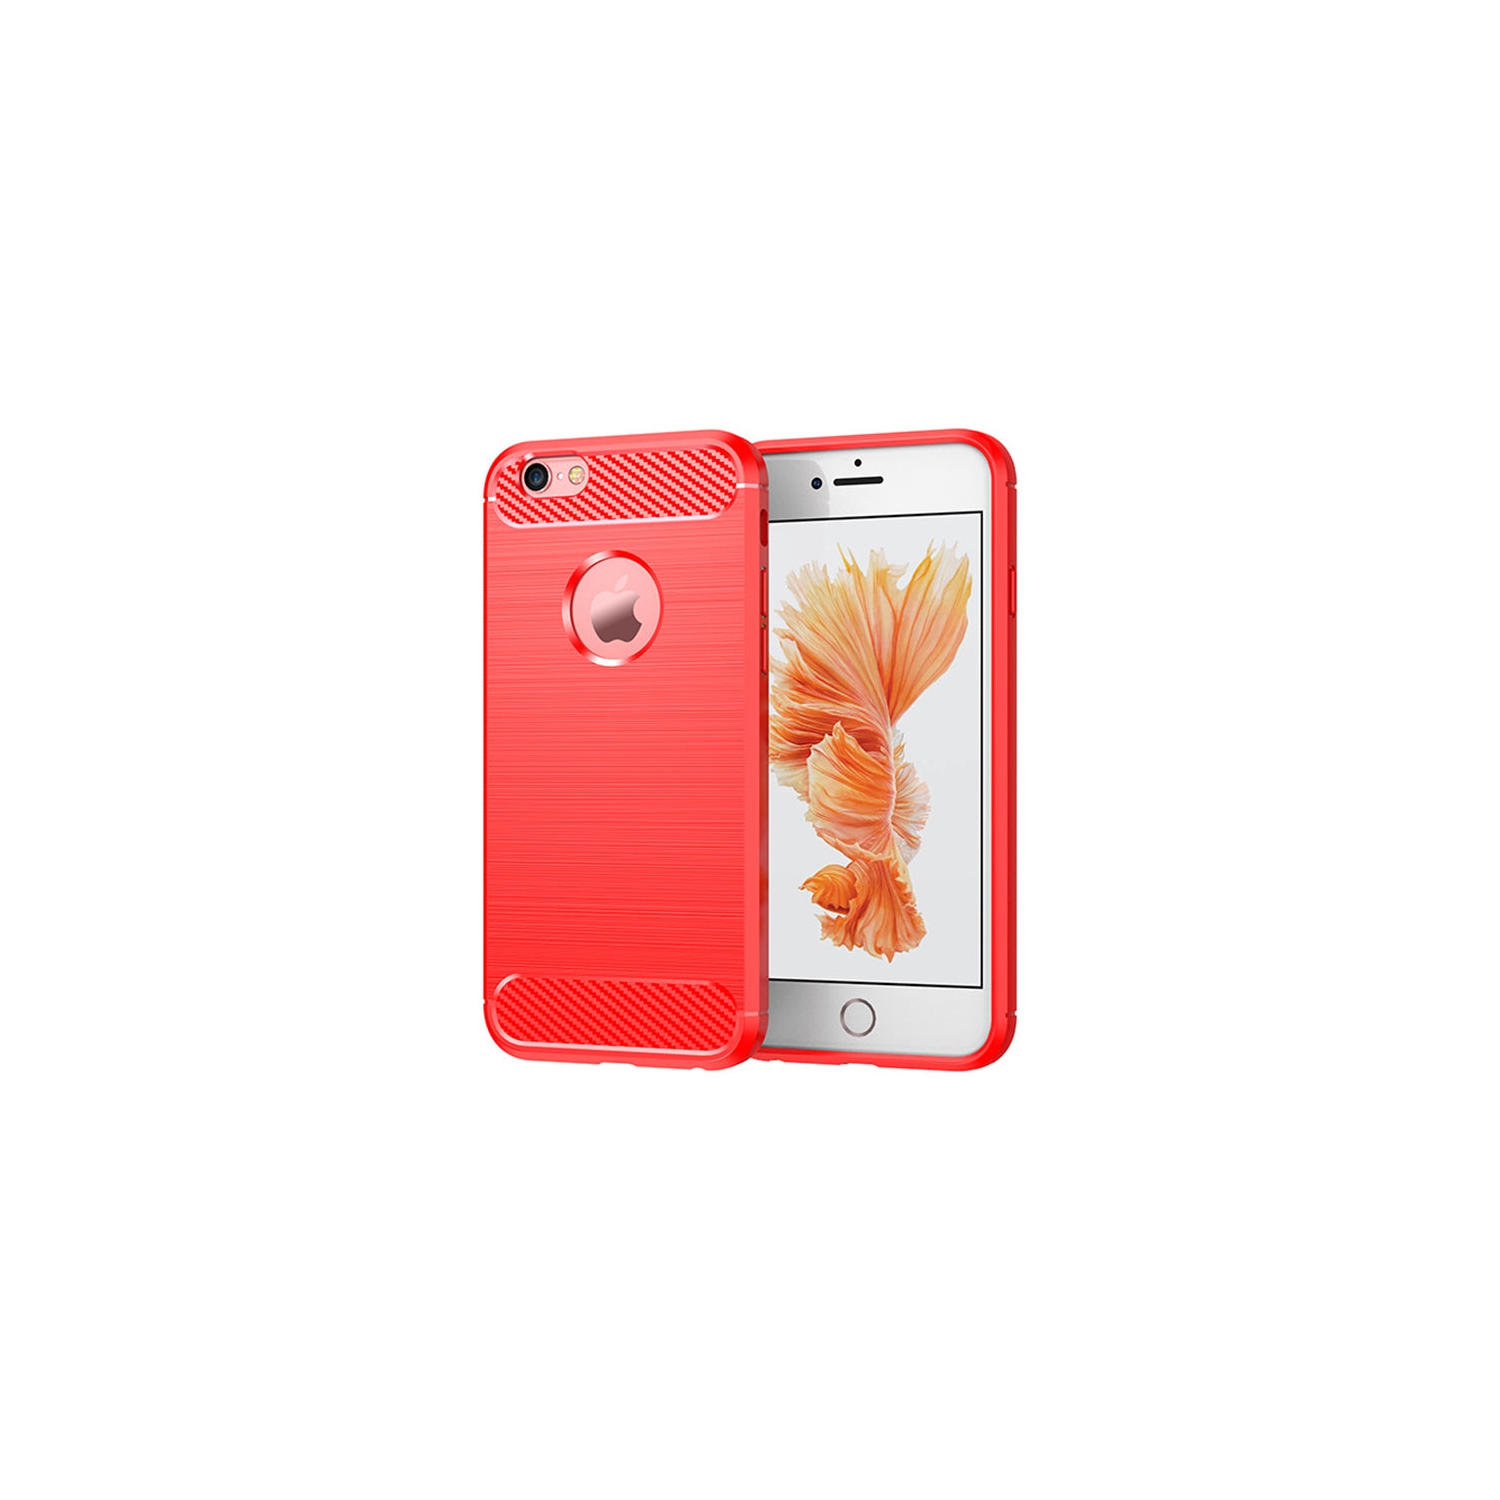 PANDACO Red Brushed Metal Case for iPhone 6 Plus or iPhone 6S Plus